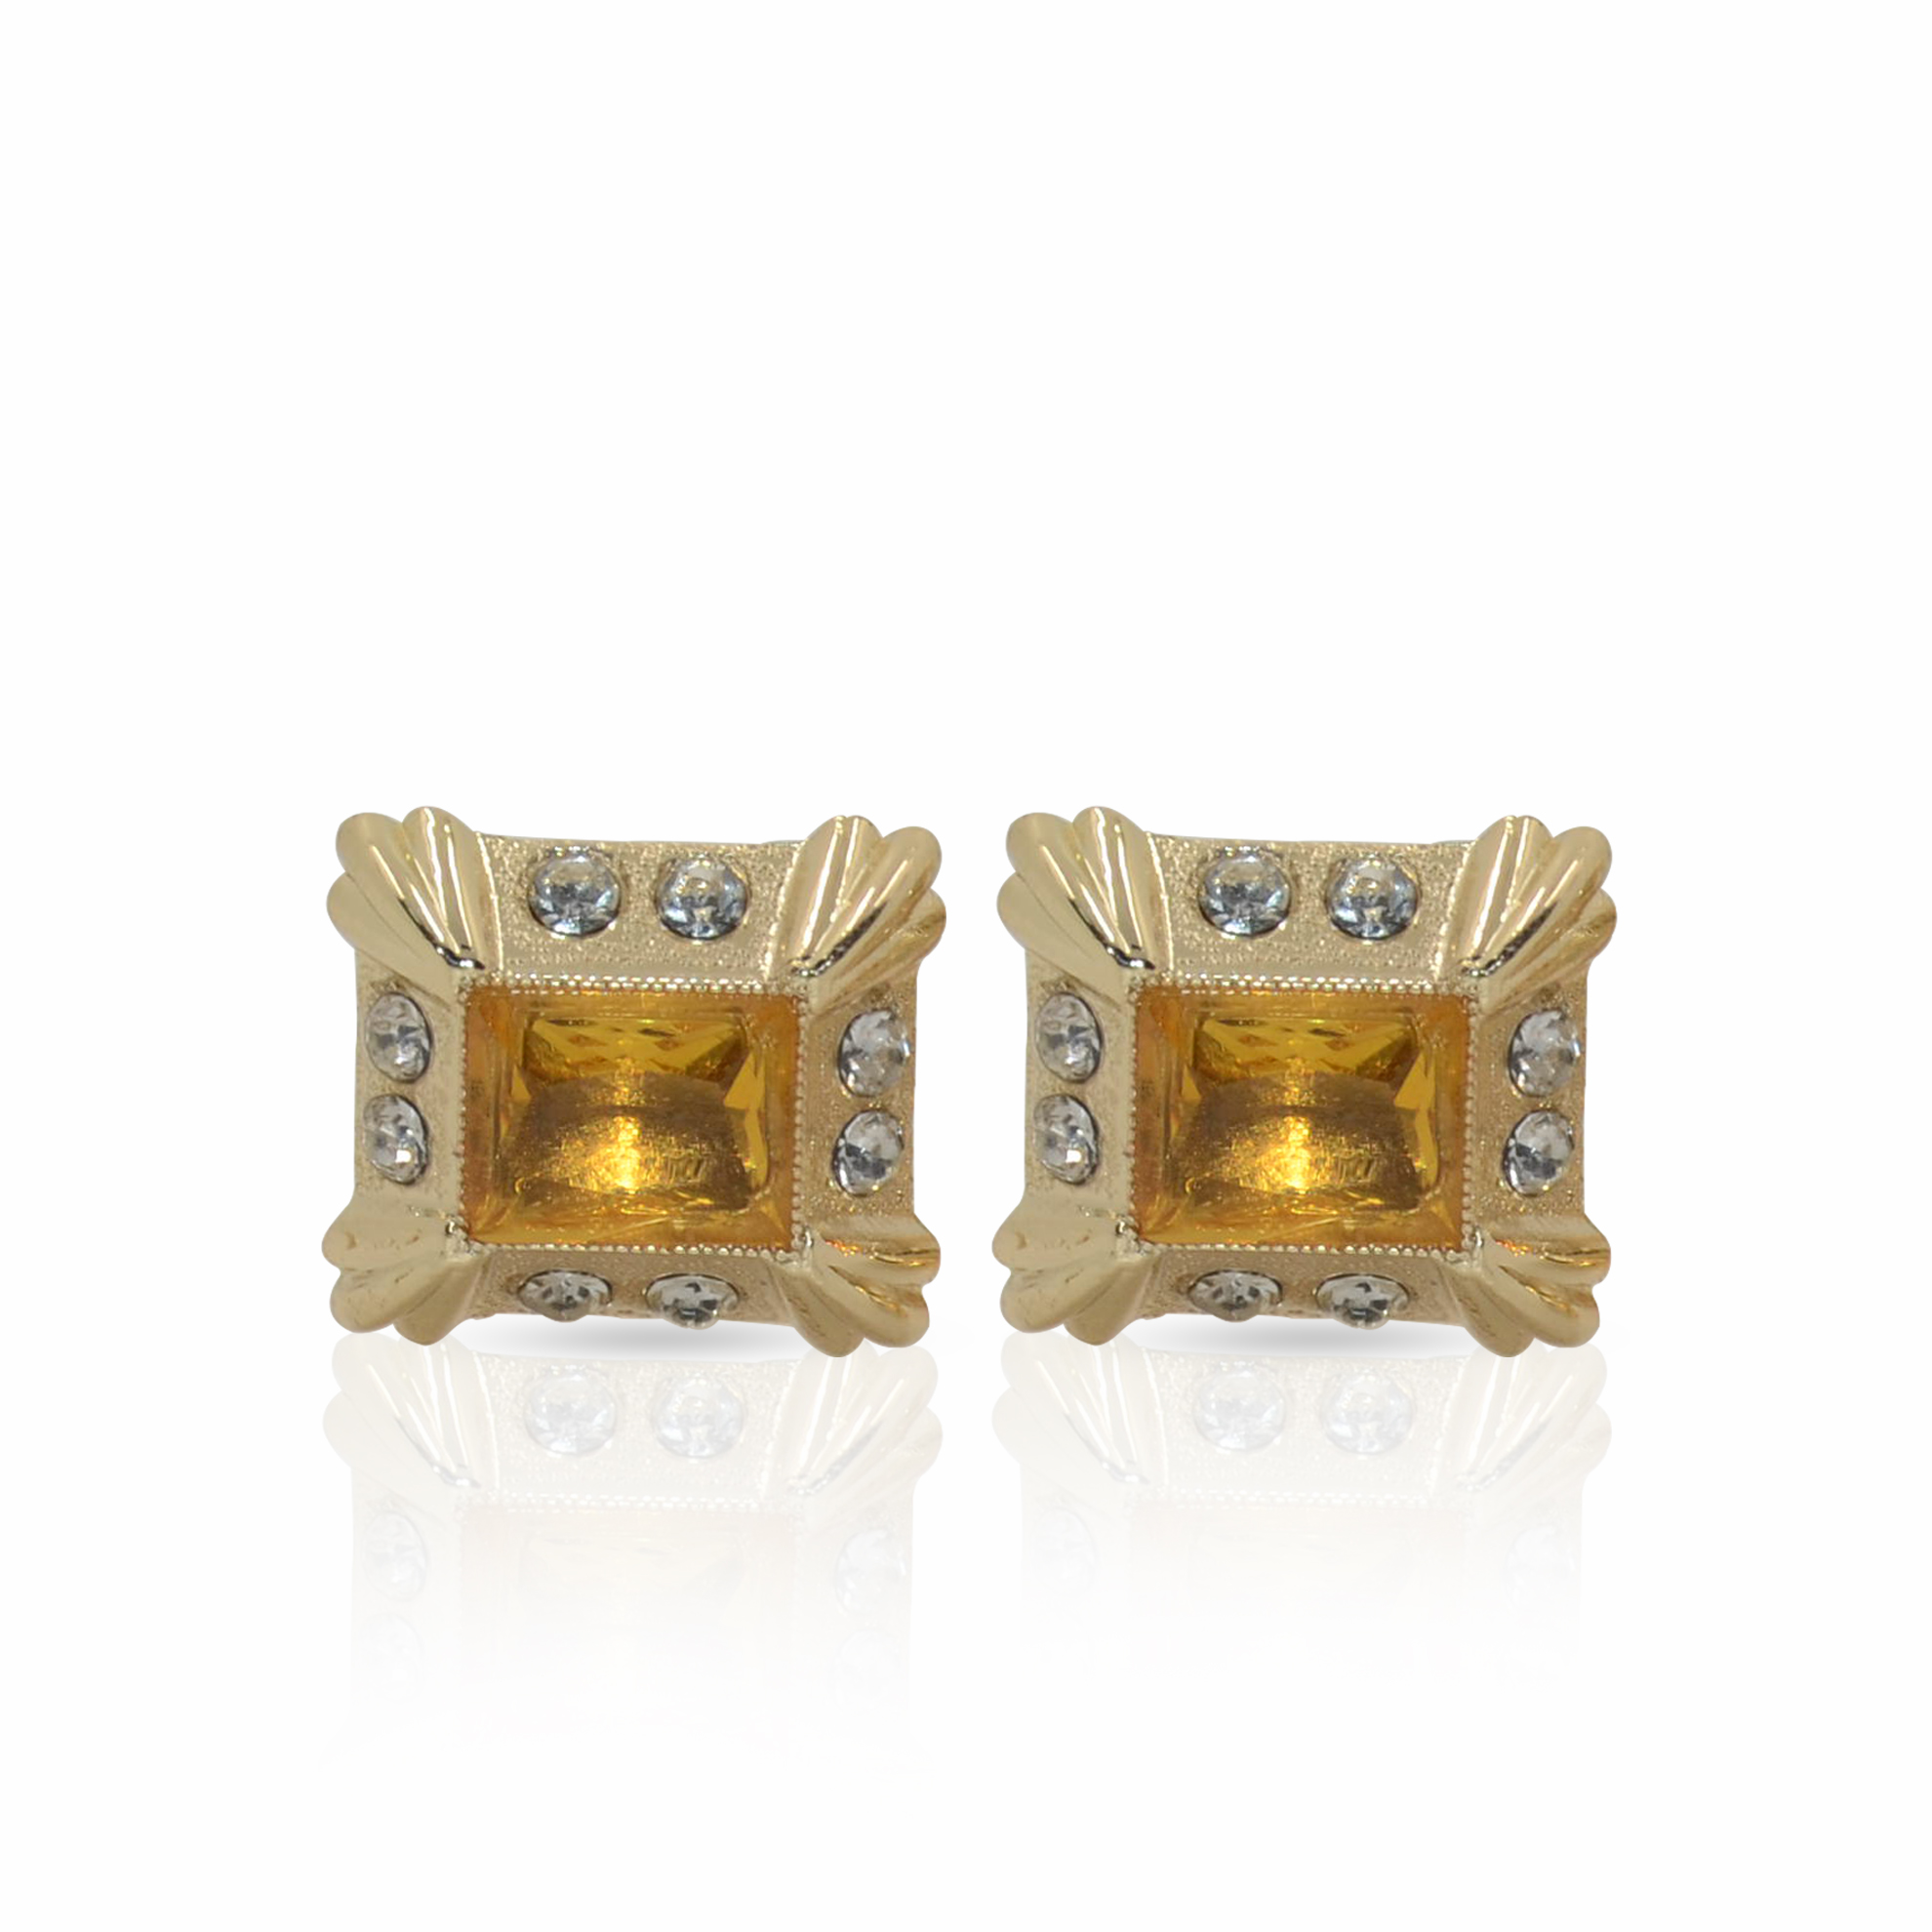 Cufflers Novelty Gold Square Cufflinks CU-2036-A with Free Gift Box